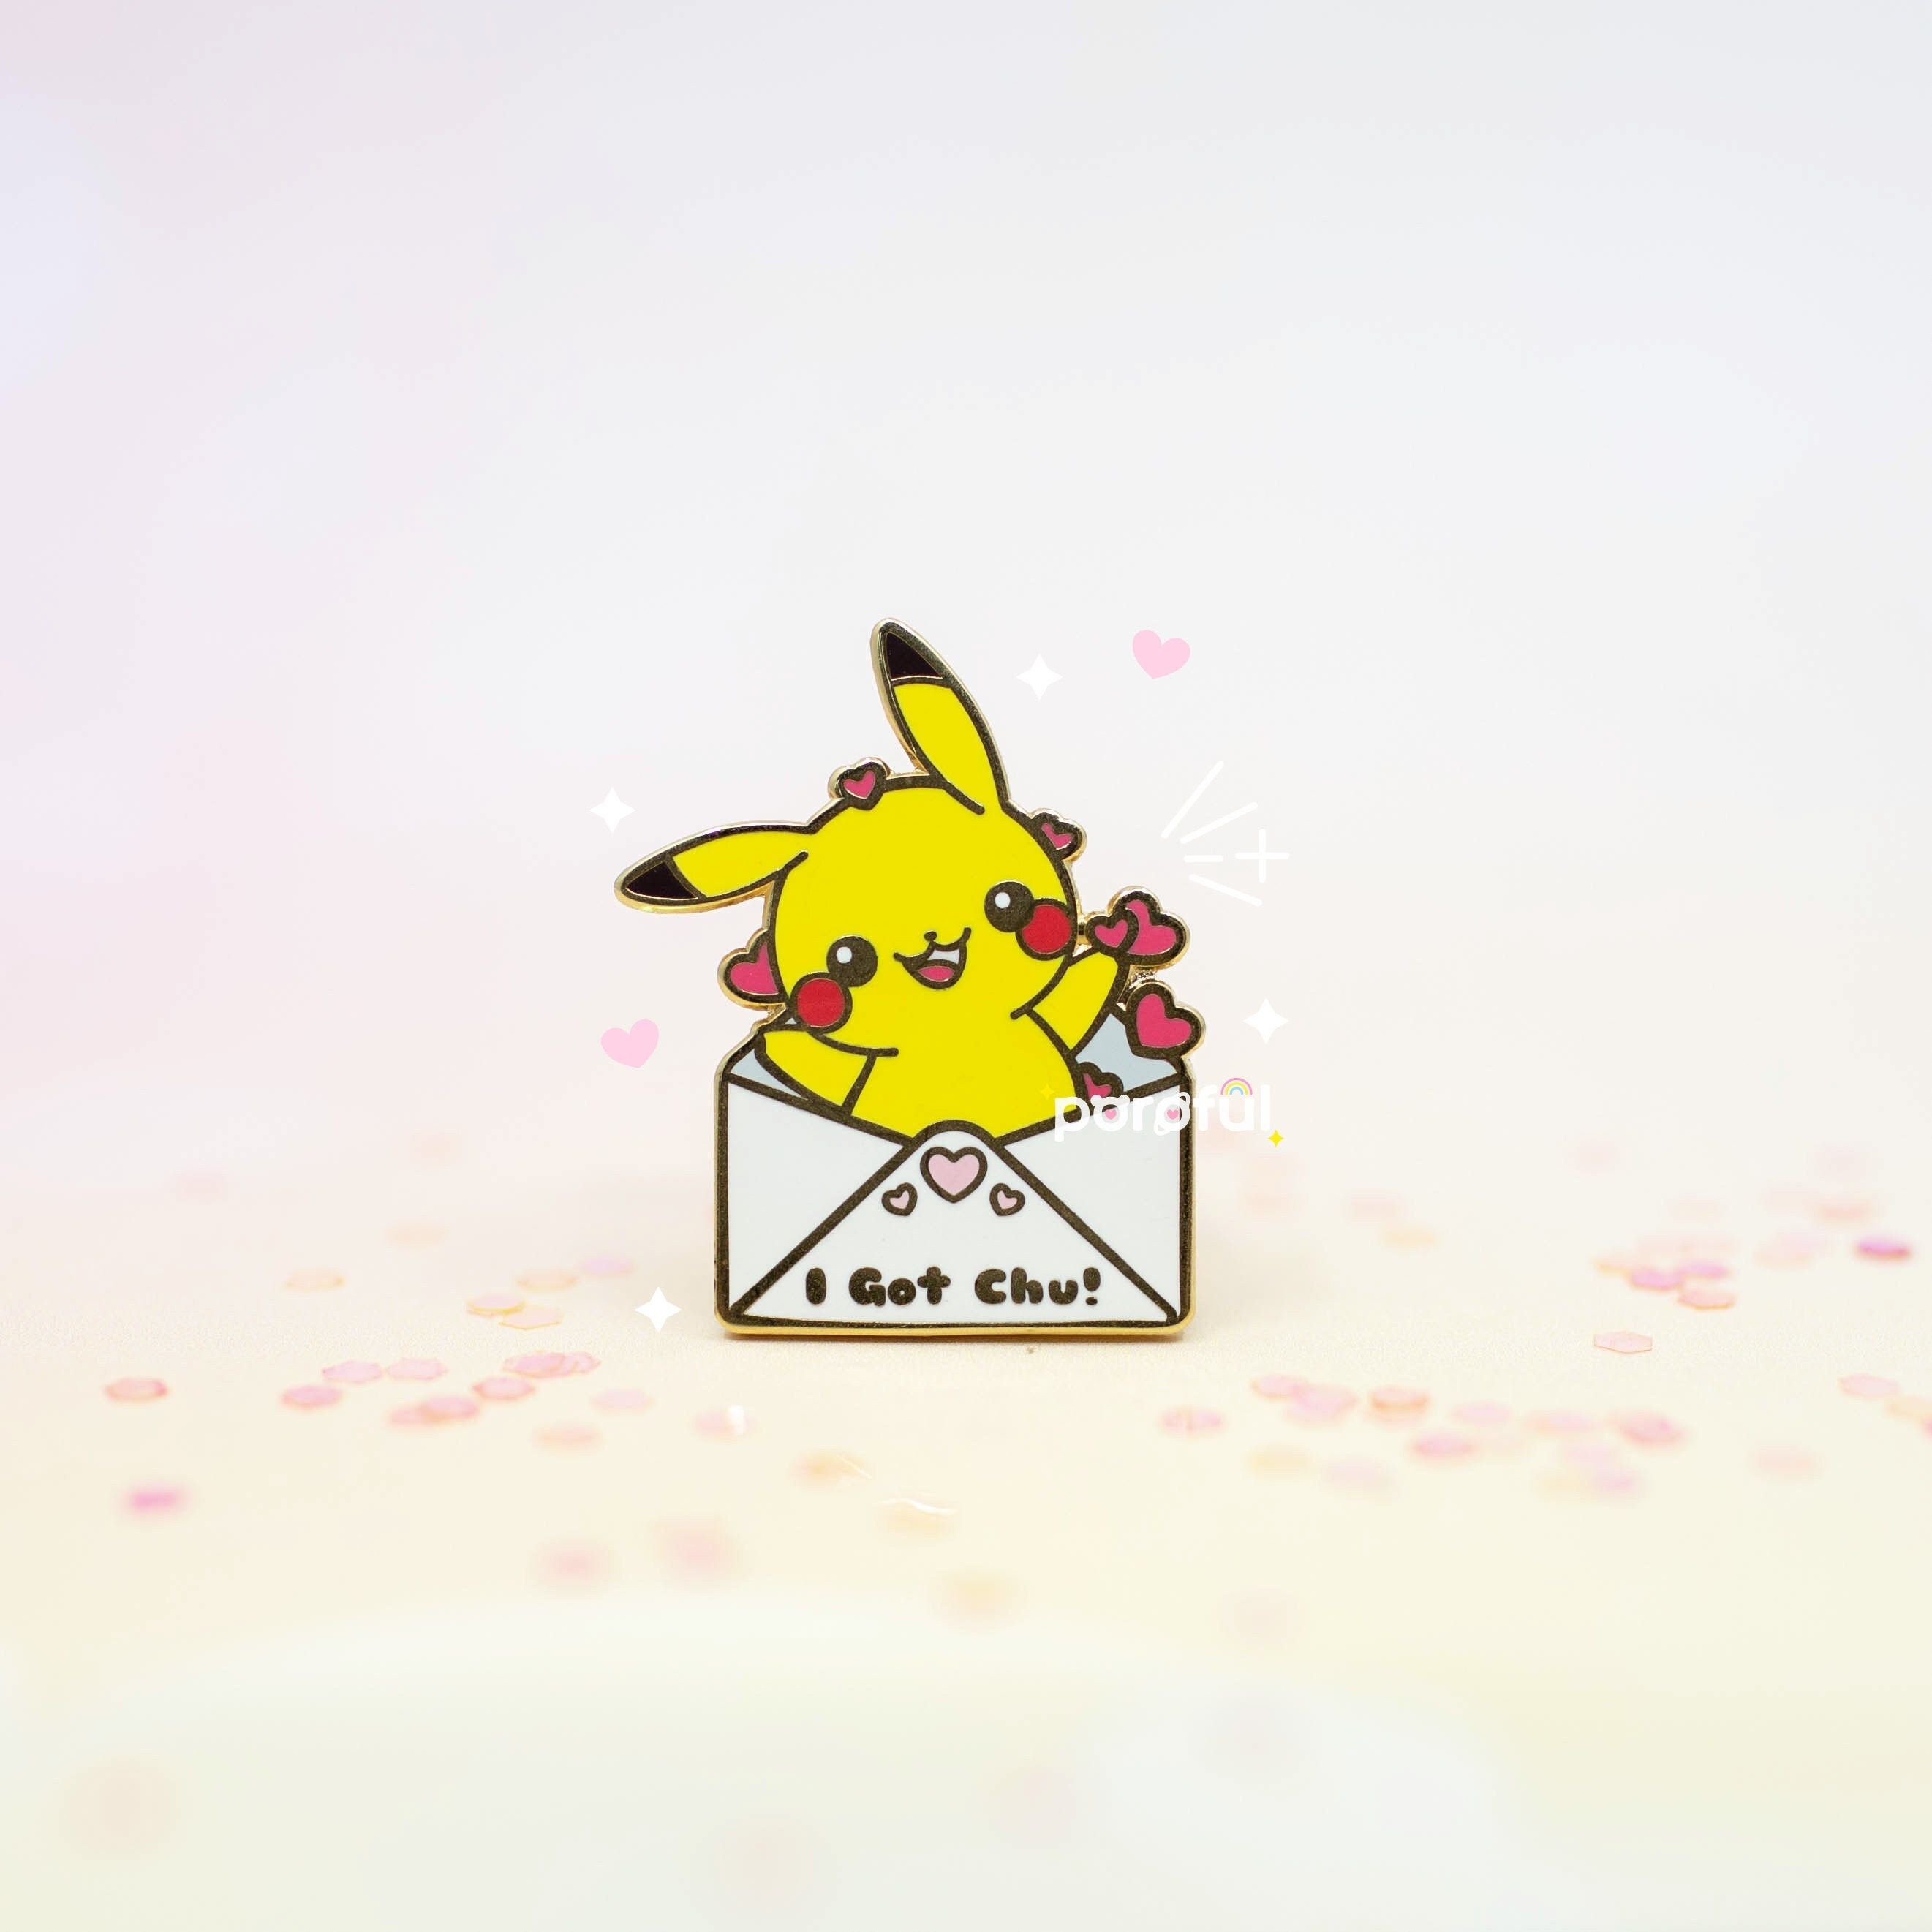 A cute Pikachu enamel pin with a love letter that says 